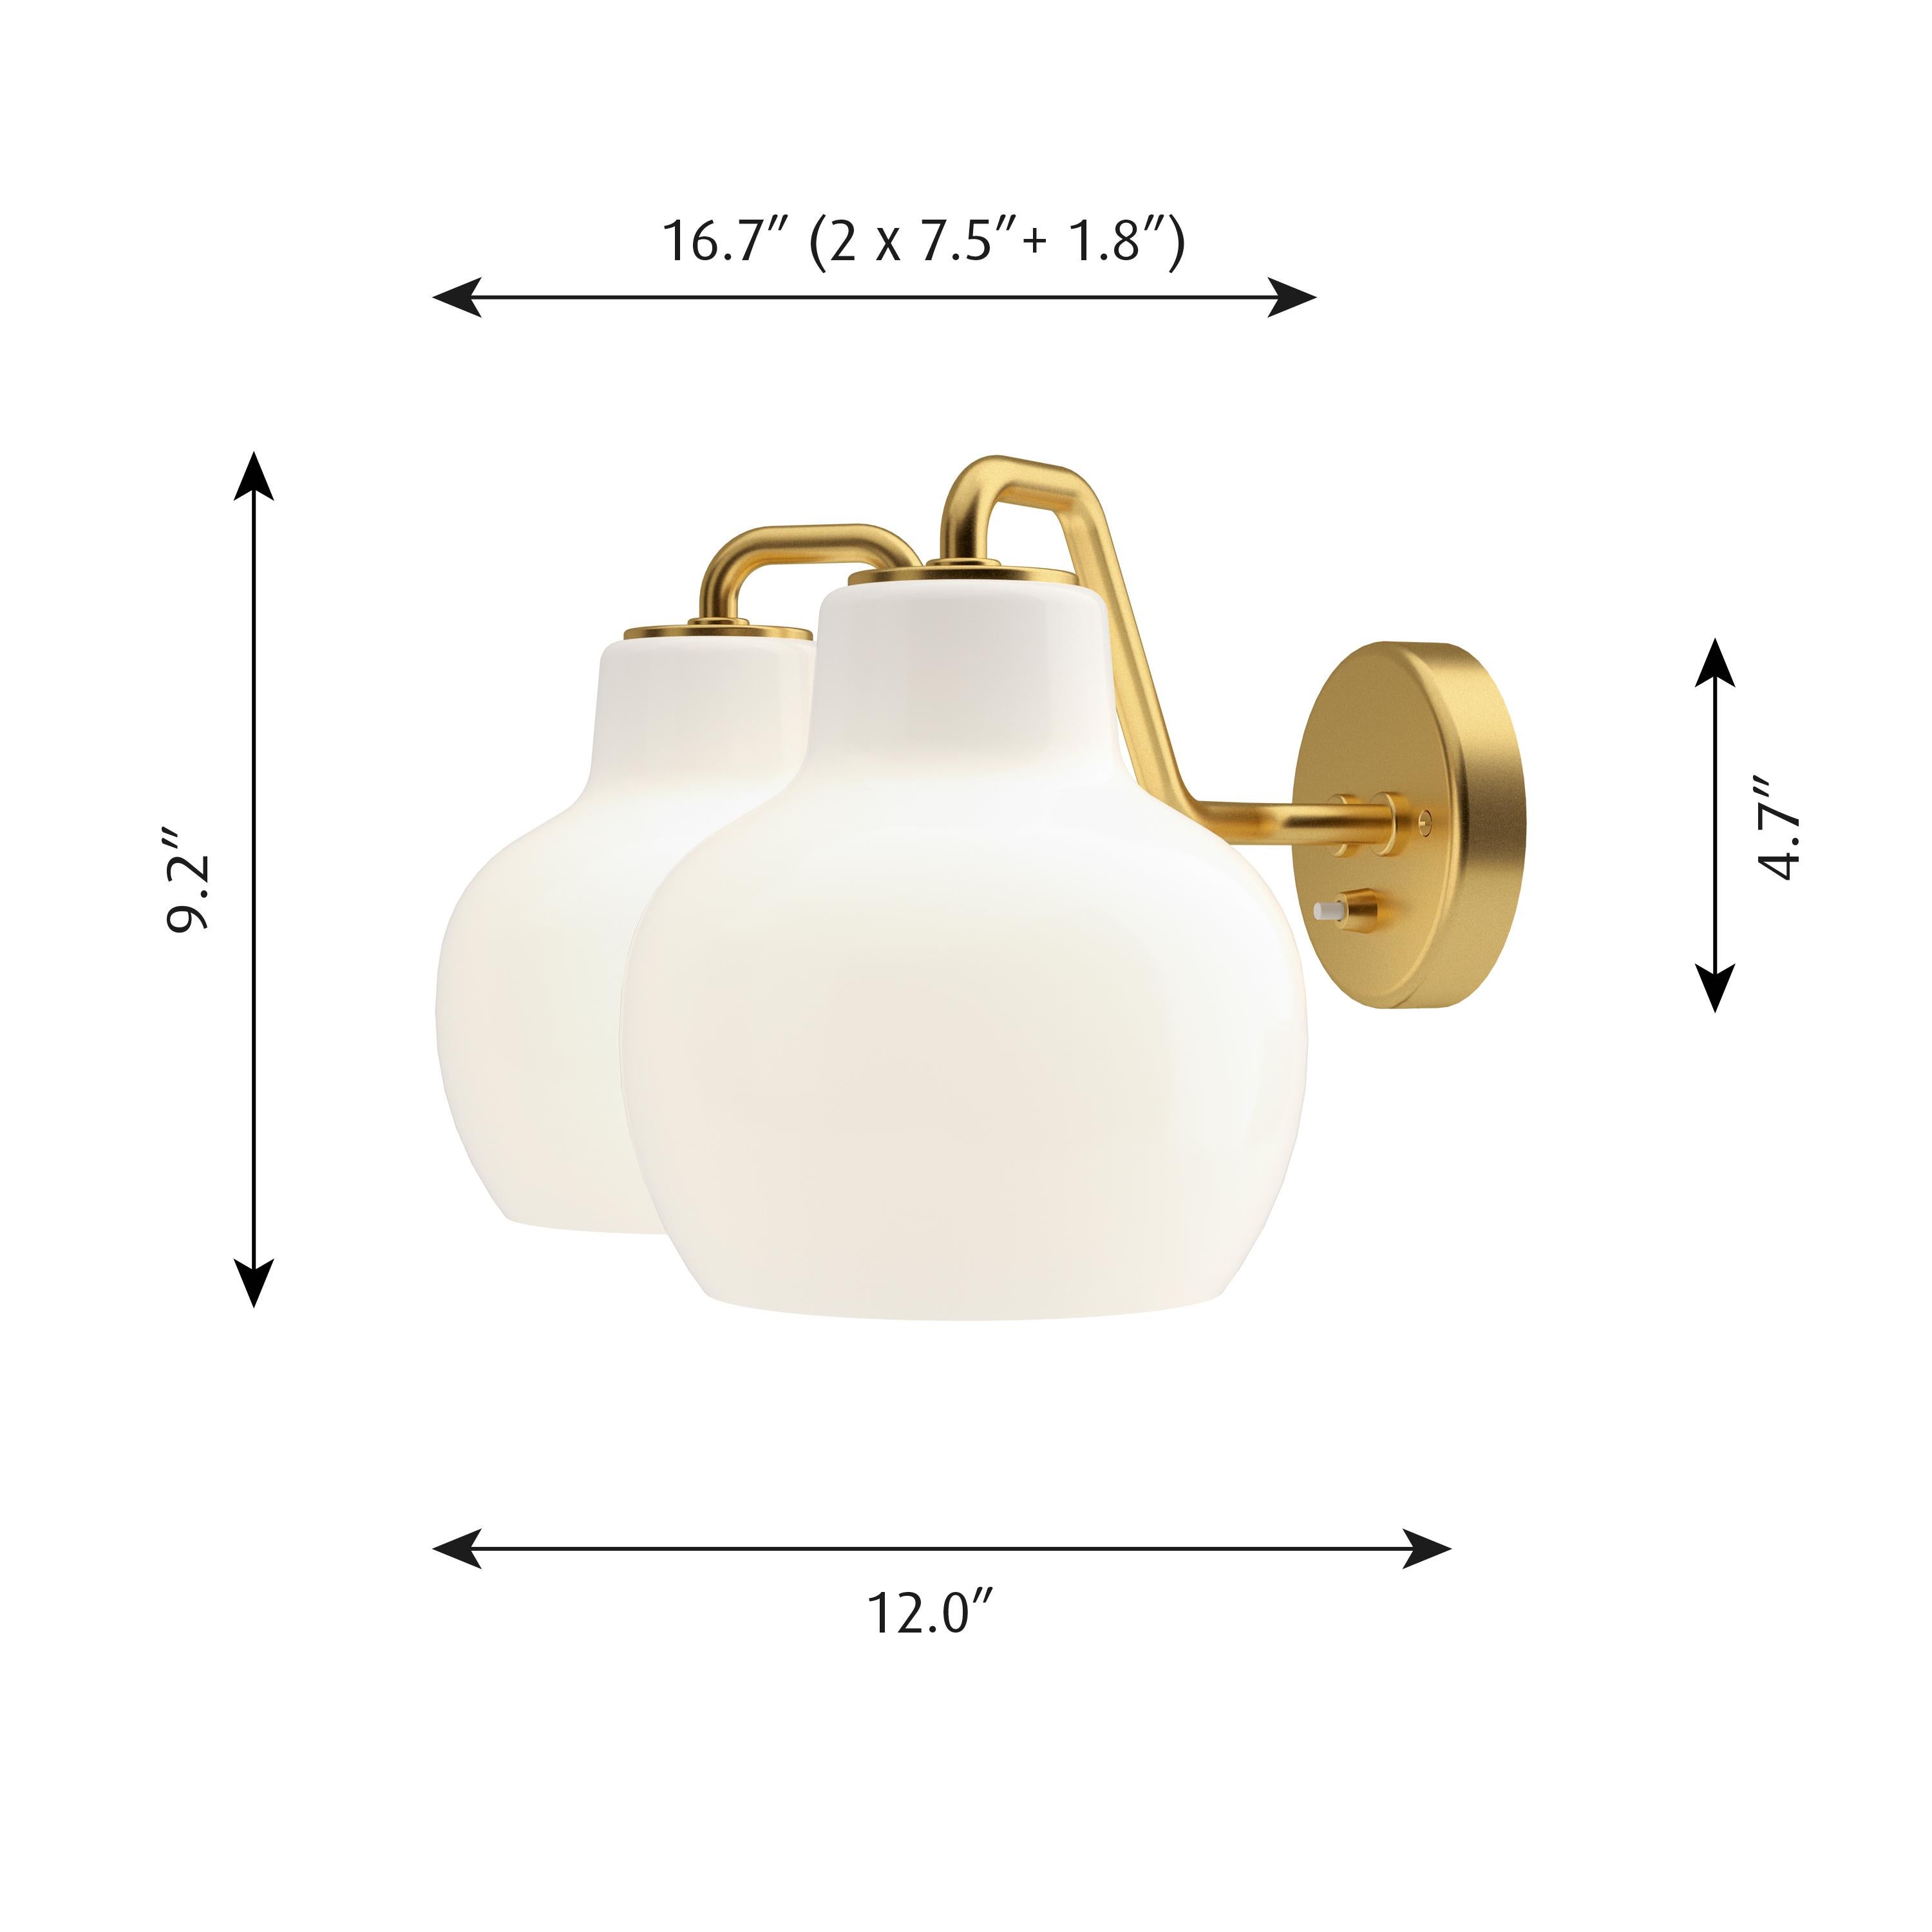 Vilhelm Lauritzen VL-2 brass and glass wall lamp for Louis Poulsen. Executed in two hand blown glossy white opal glass shades and unfinished satin polished brass armature and backplate. The sconce emits light directed primarily downwards. The opal